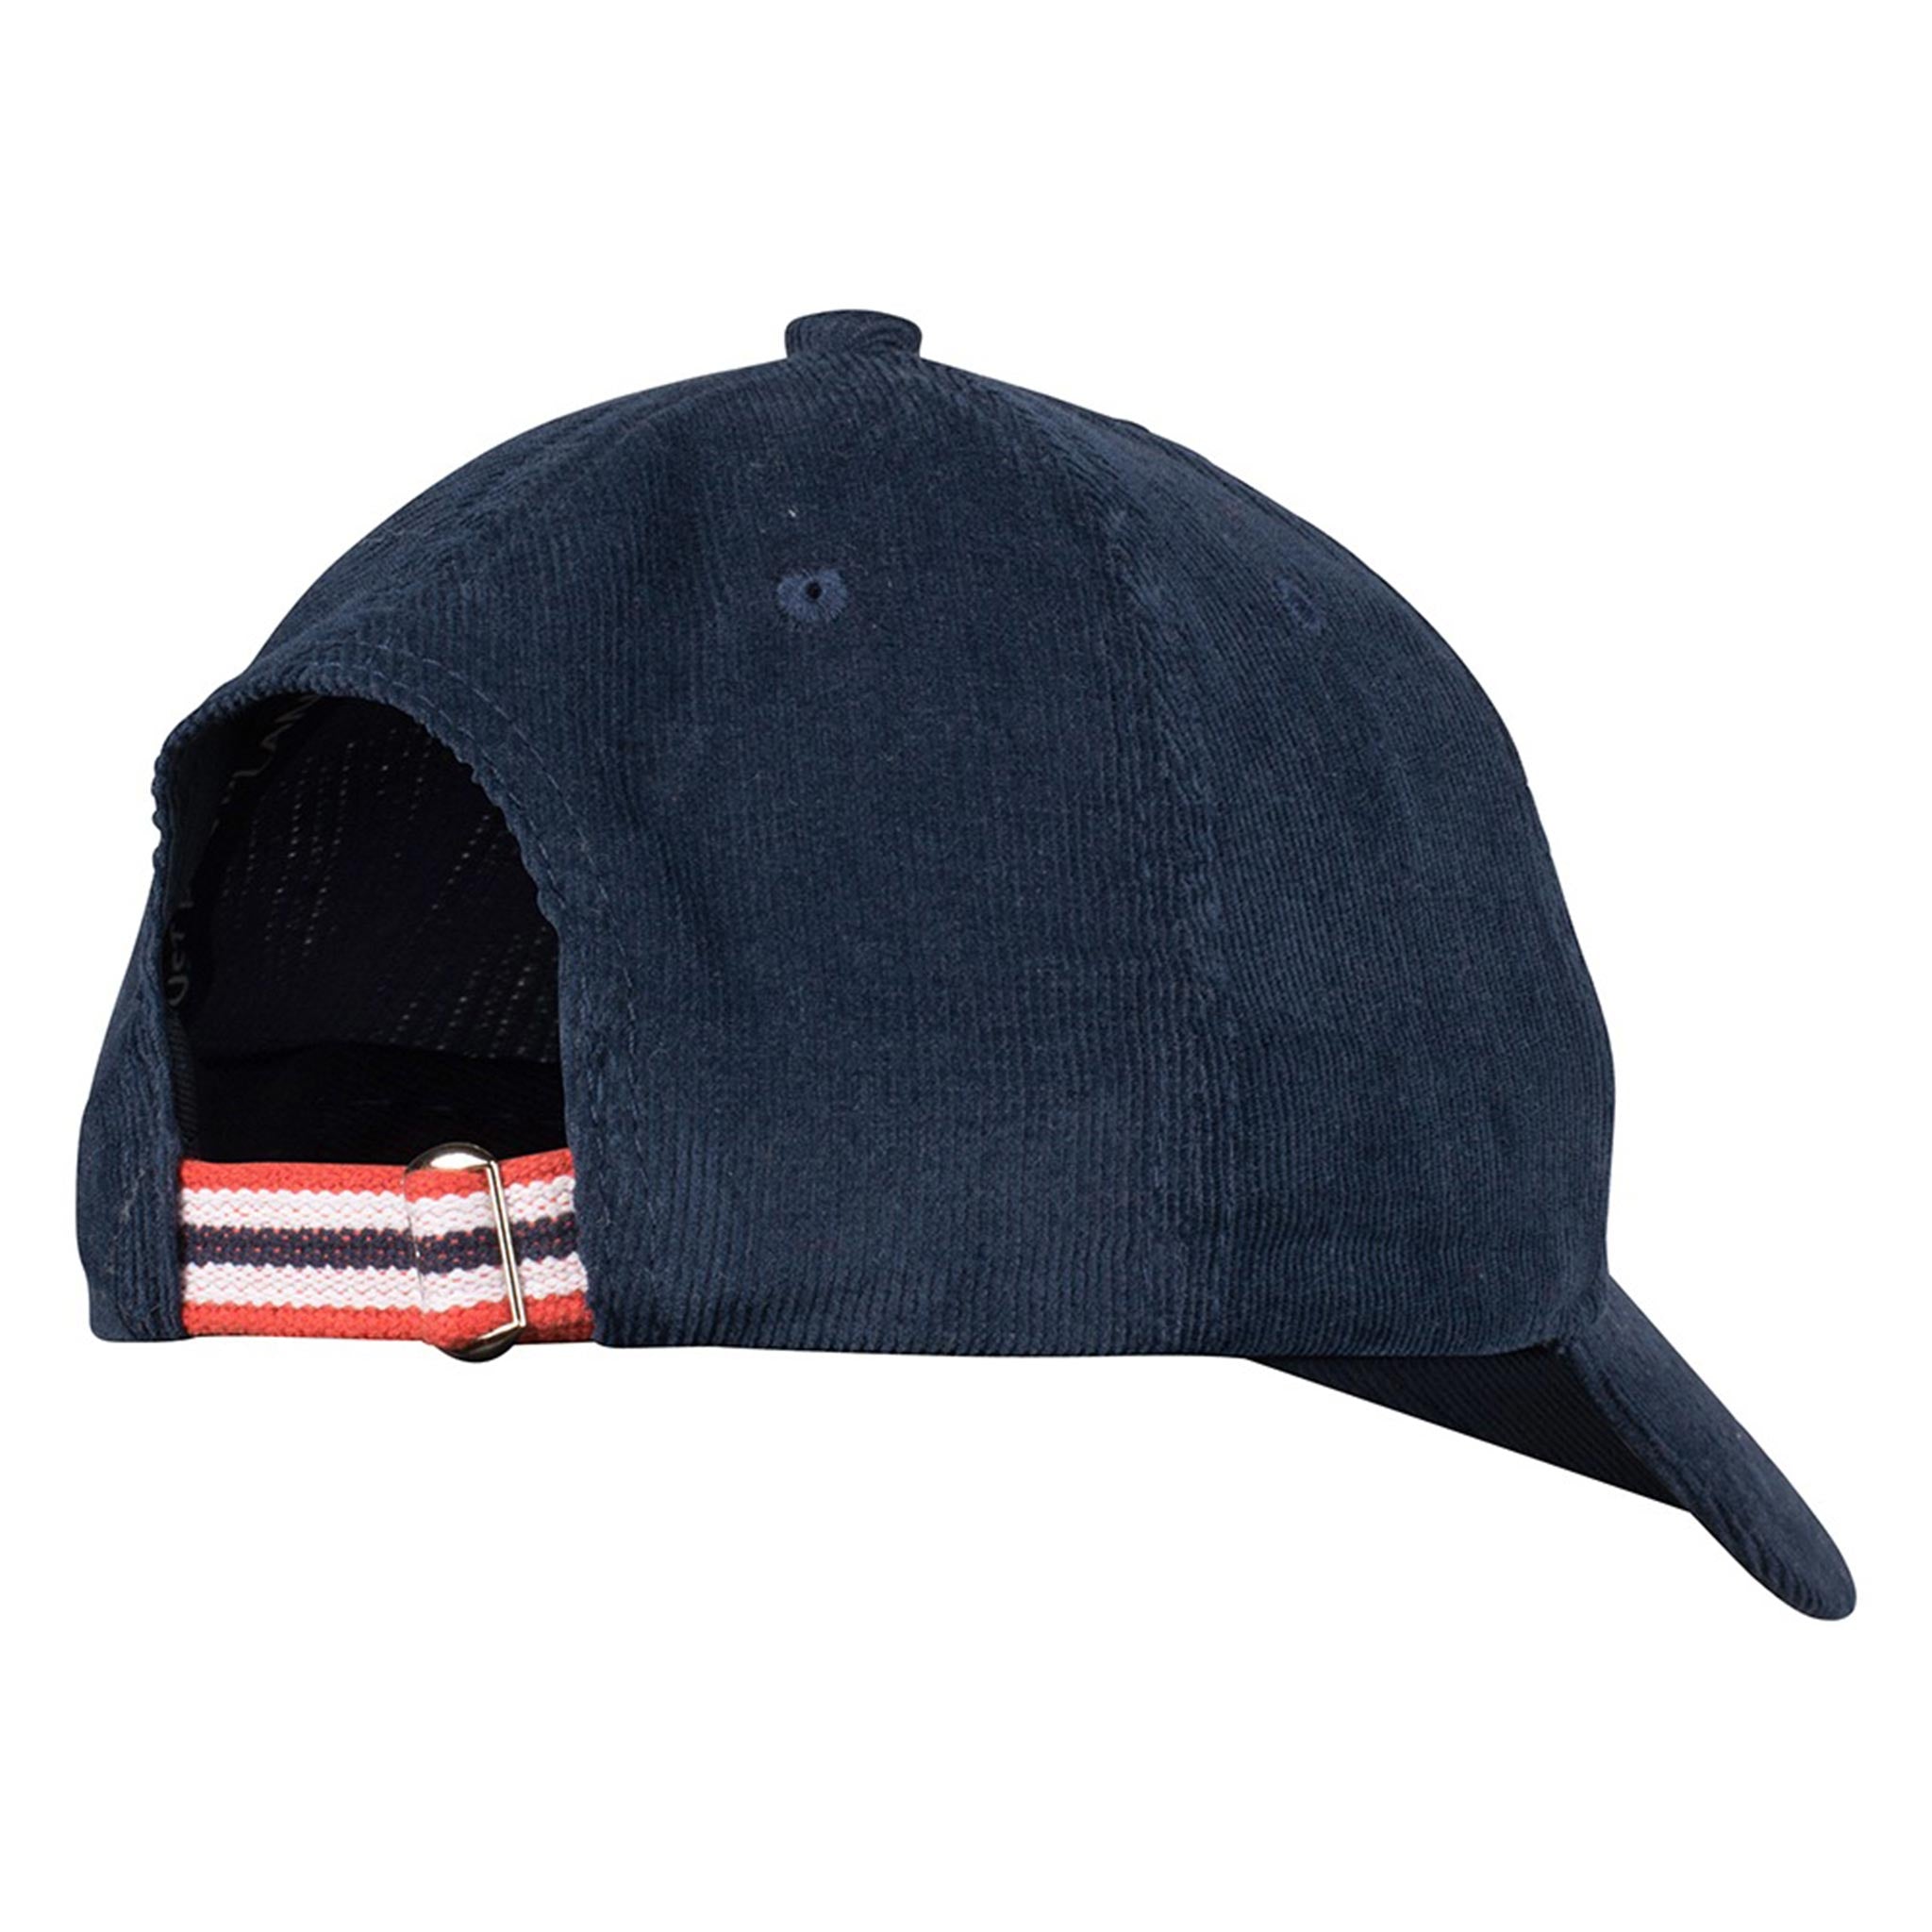 Concord Patch Cap in Faded Navy